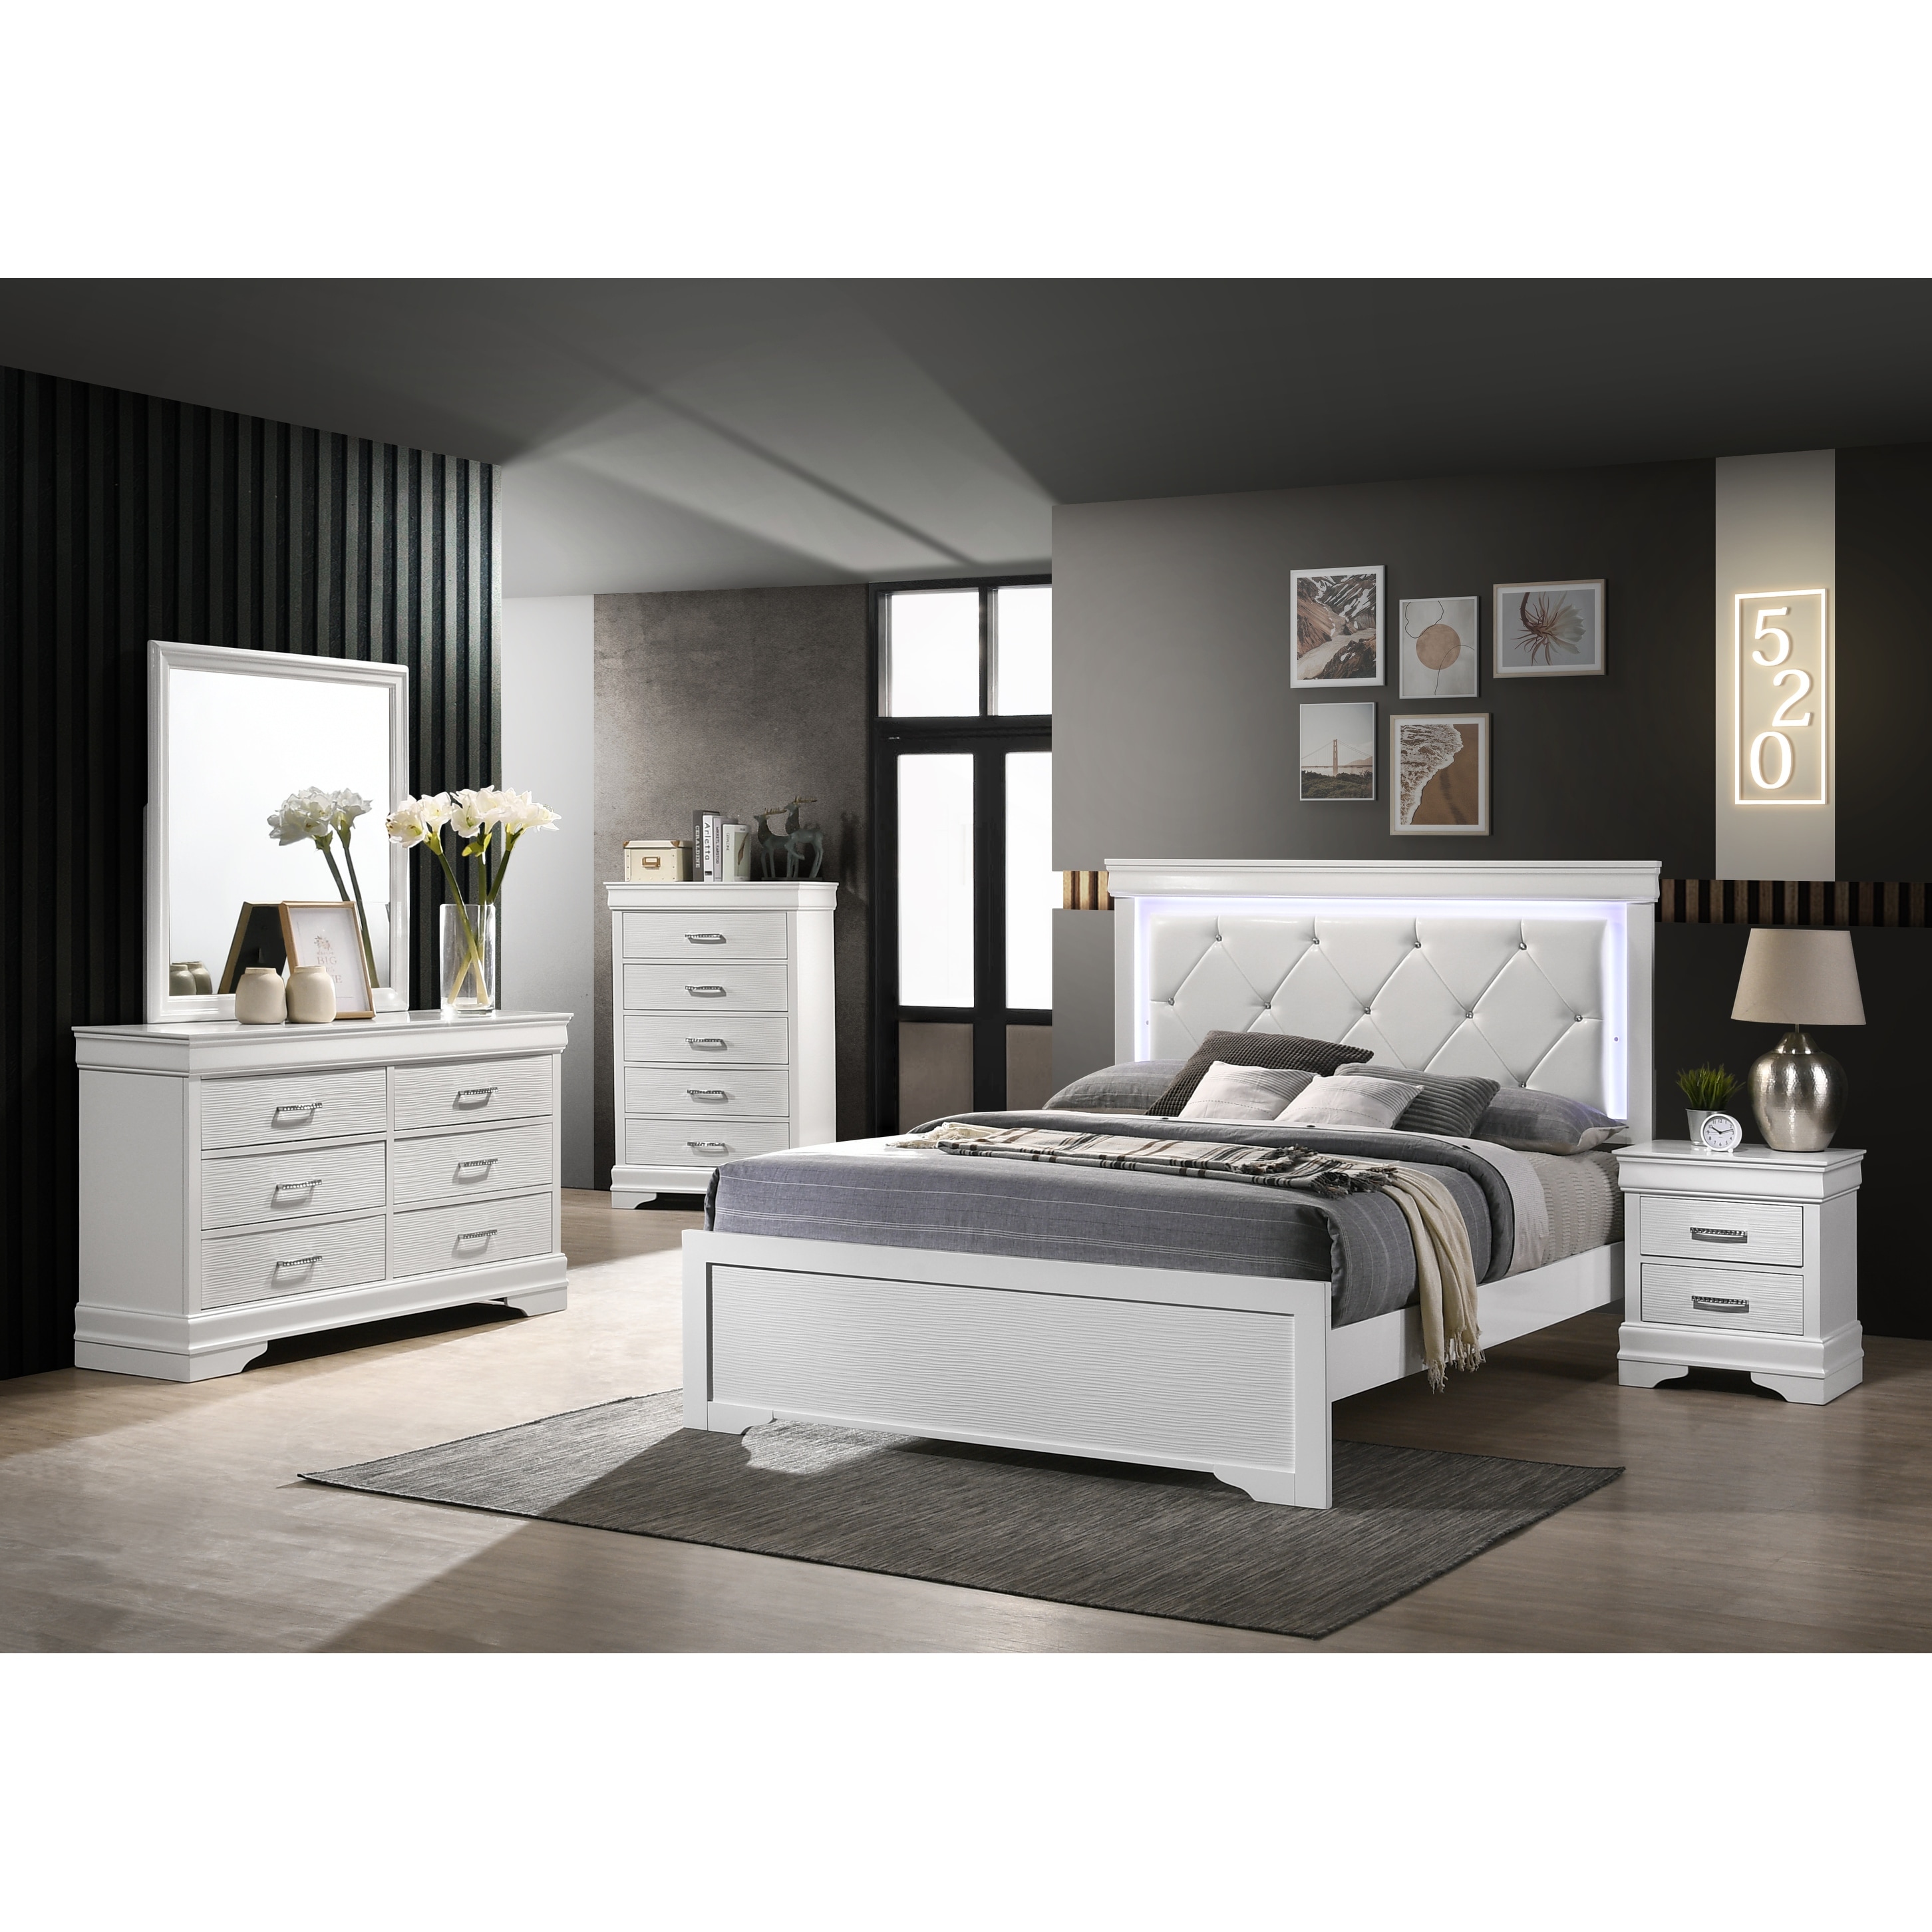 Brooklyn Modern Style 4pc/5pc Upholstery Bedroom Set Made With Wood and Led Lights